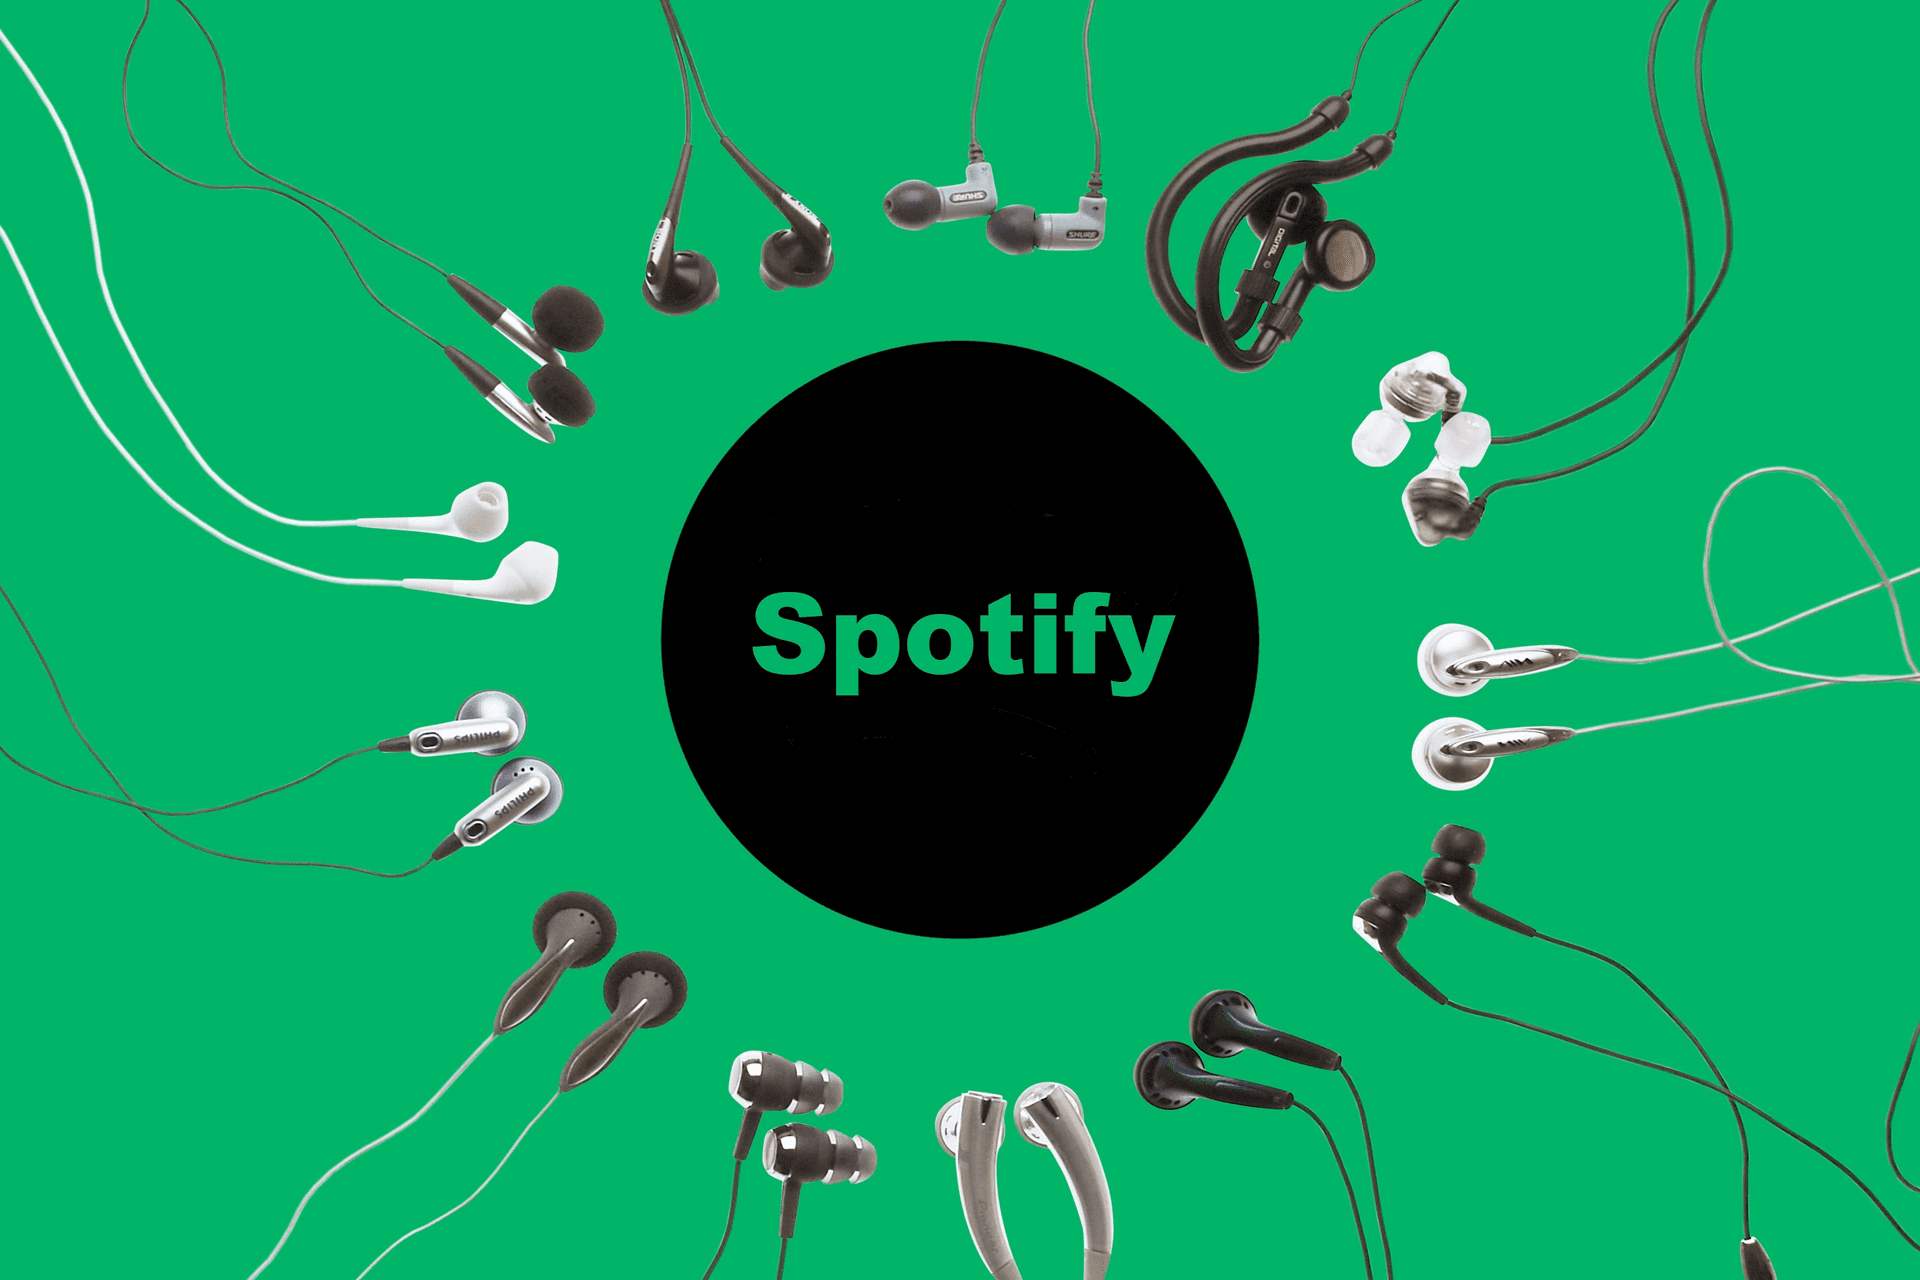 Purchased a Spotify gift card? Now use it by becoming a customer or gift it!